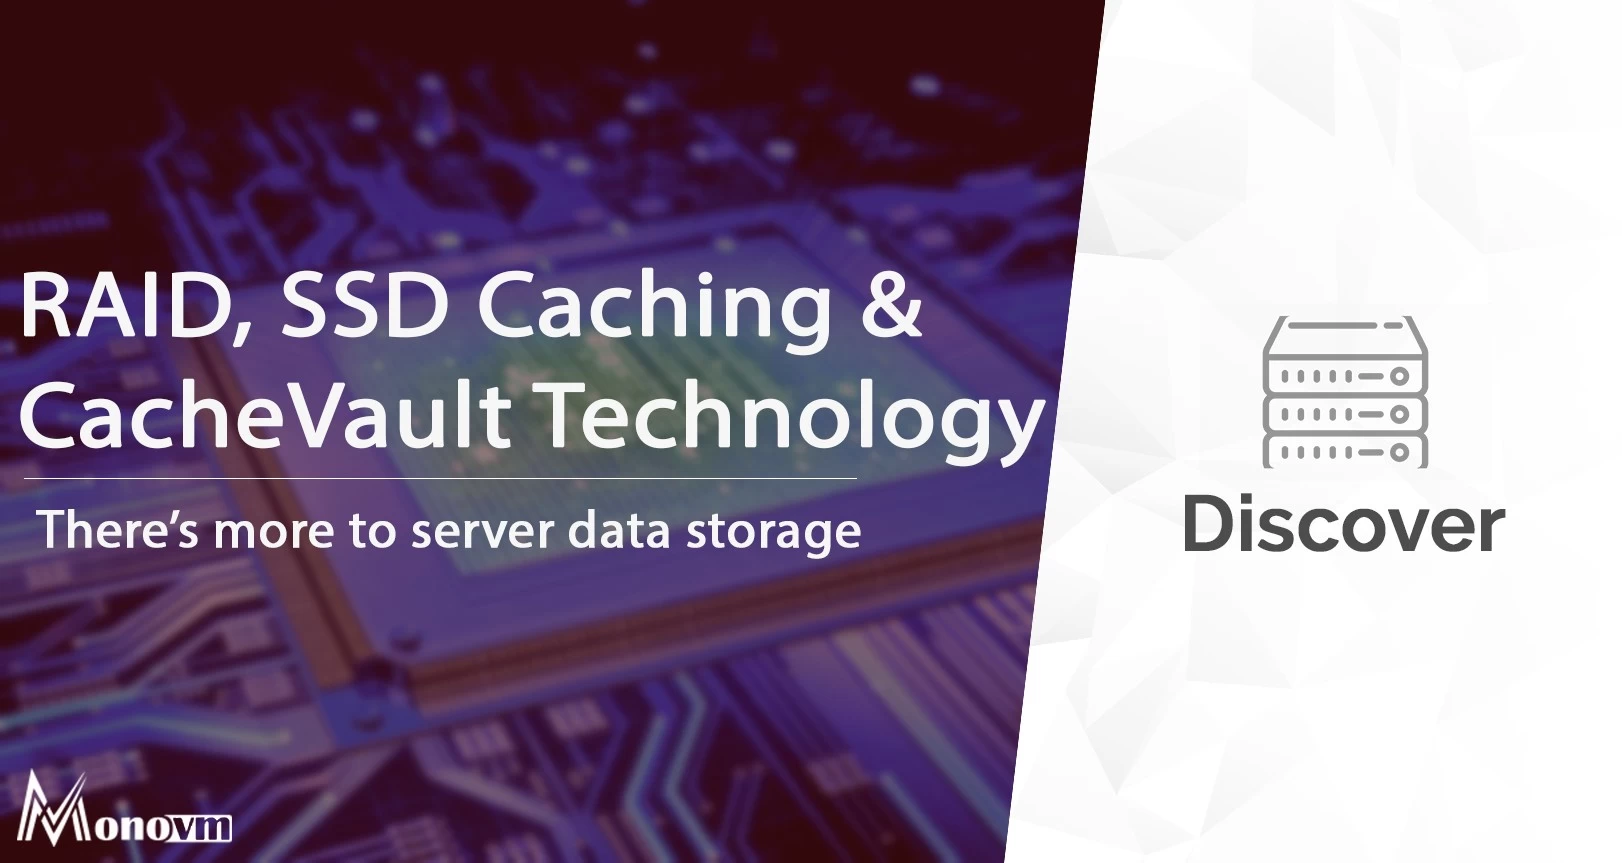 RAID, SSD Caching, and CacheVault Technology